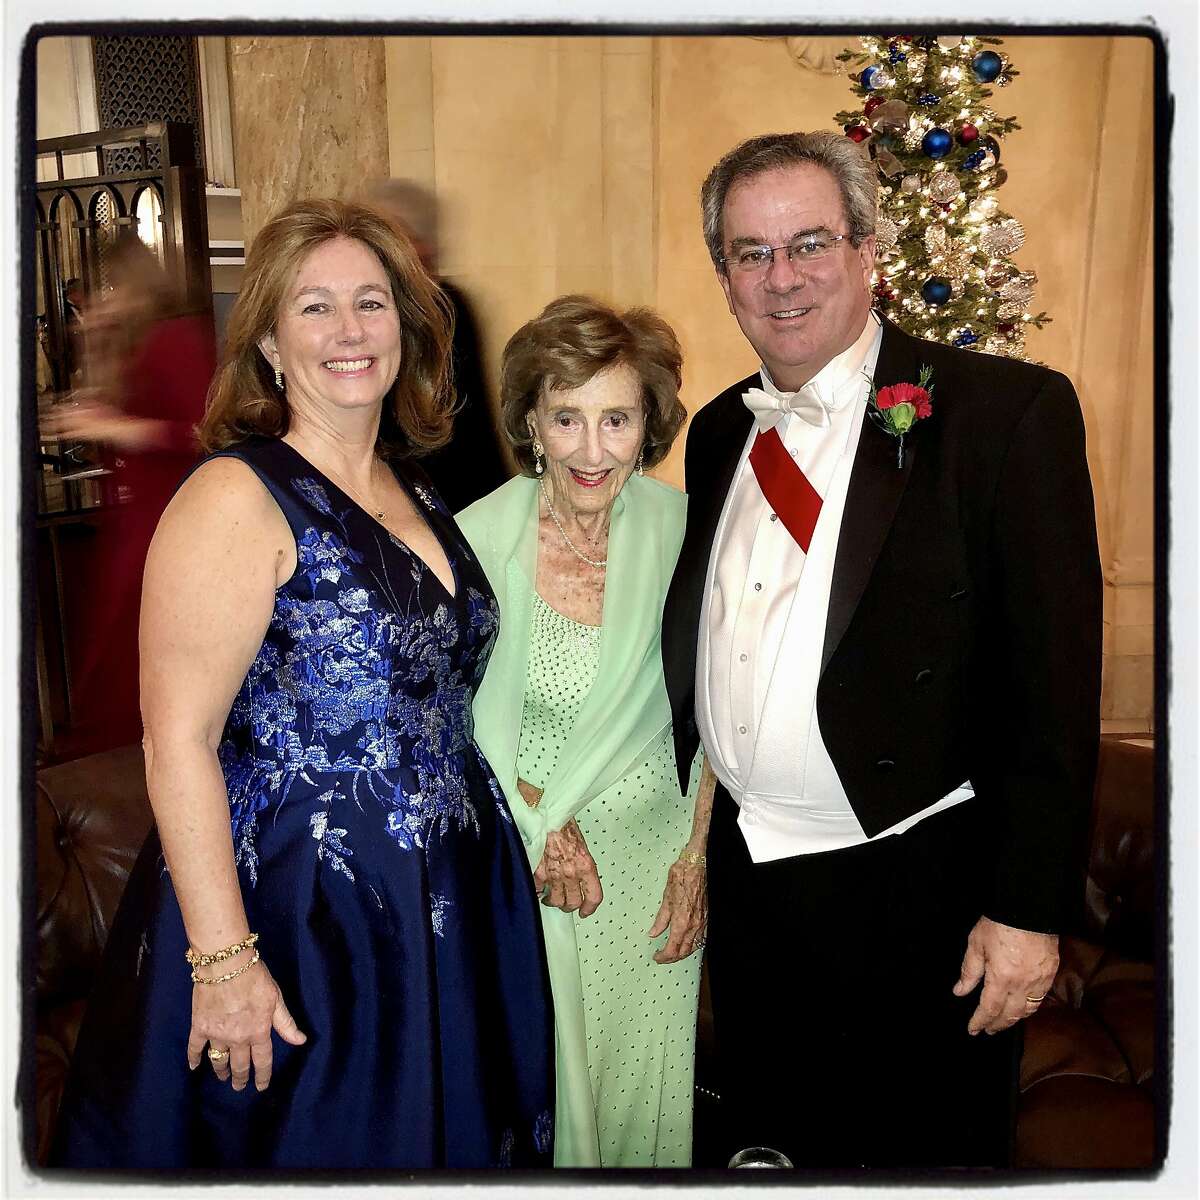 Former debutante Anne Giannini McWilliams (center) with her daughter-in-law and son, Sheila and Keith McWilliams, at the Cotillion Club Debutante Ball. Dec. 21, 2019.